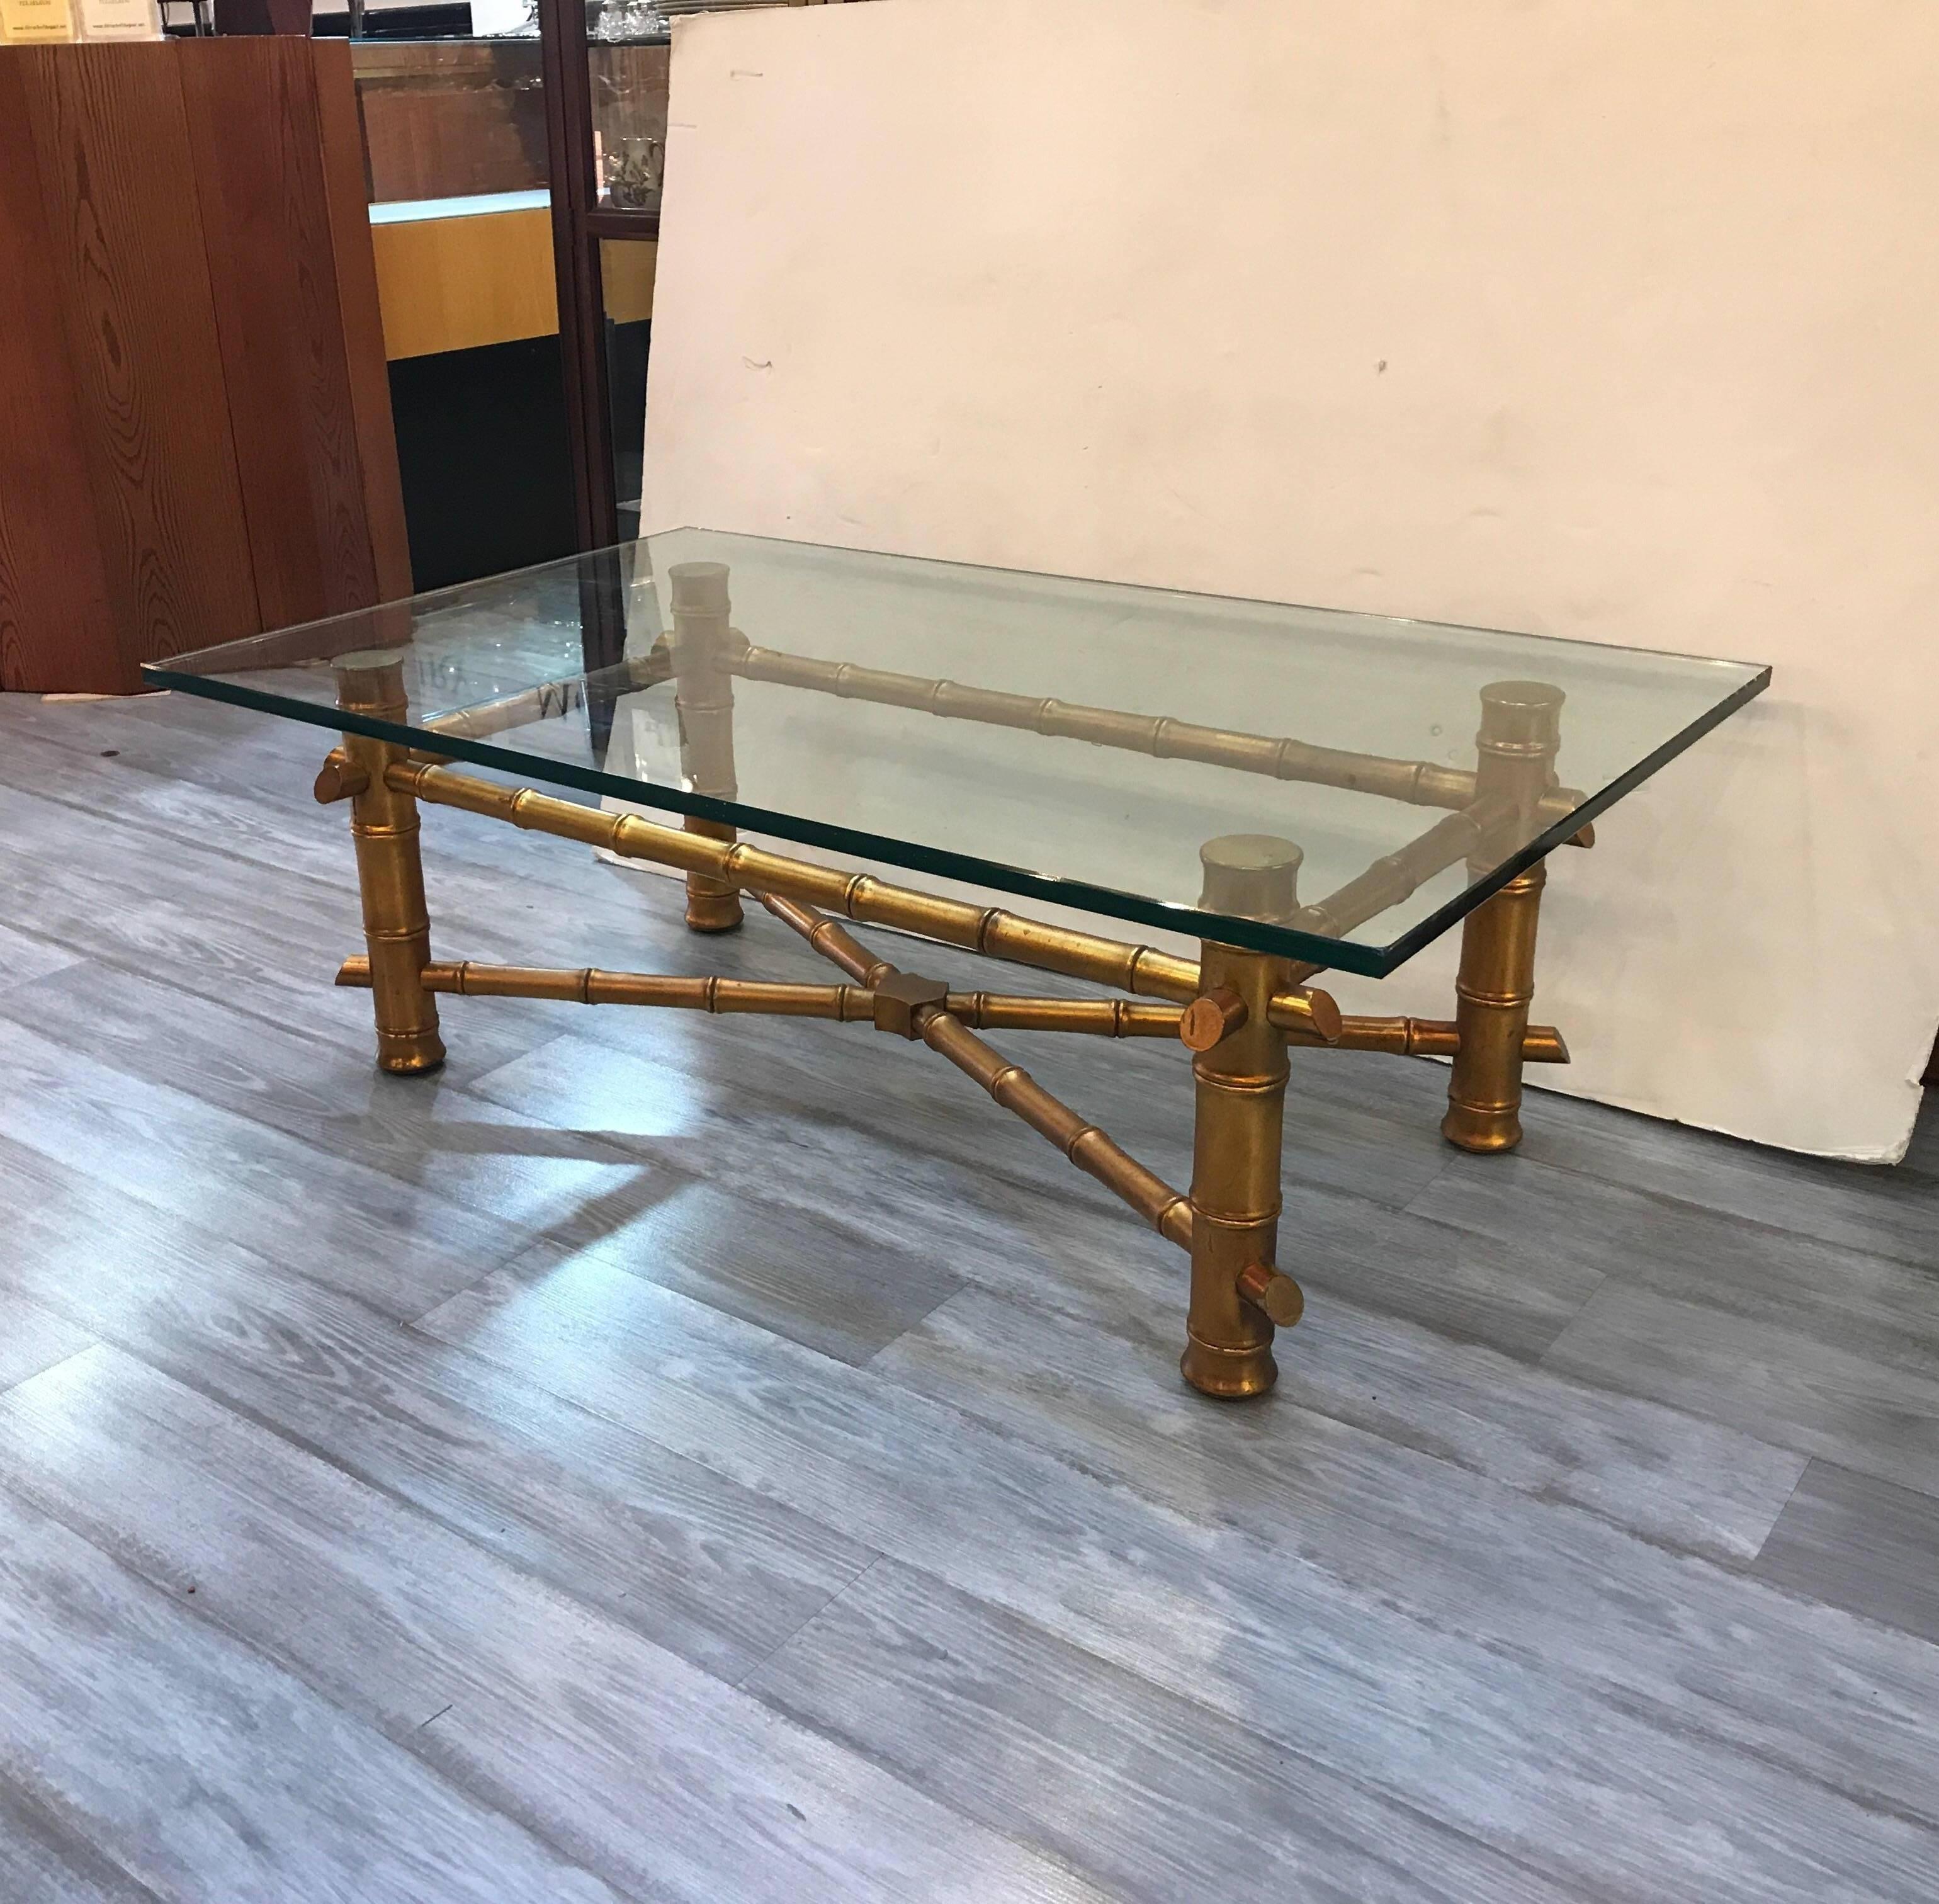 Hollywood Regency faux bamboo coffee table with thick glass top. The thick legs with bamboo style carving with sturdy X stretcher base. The top is a generous three quarter inch.